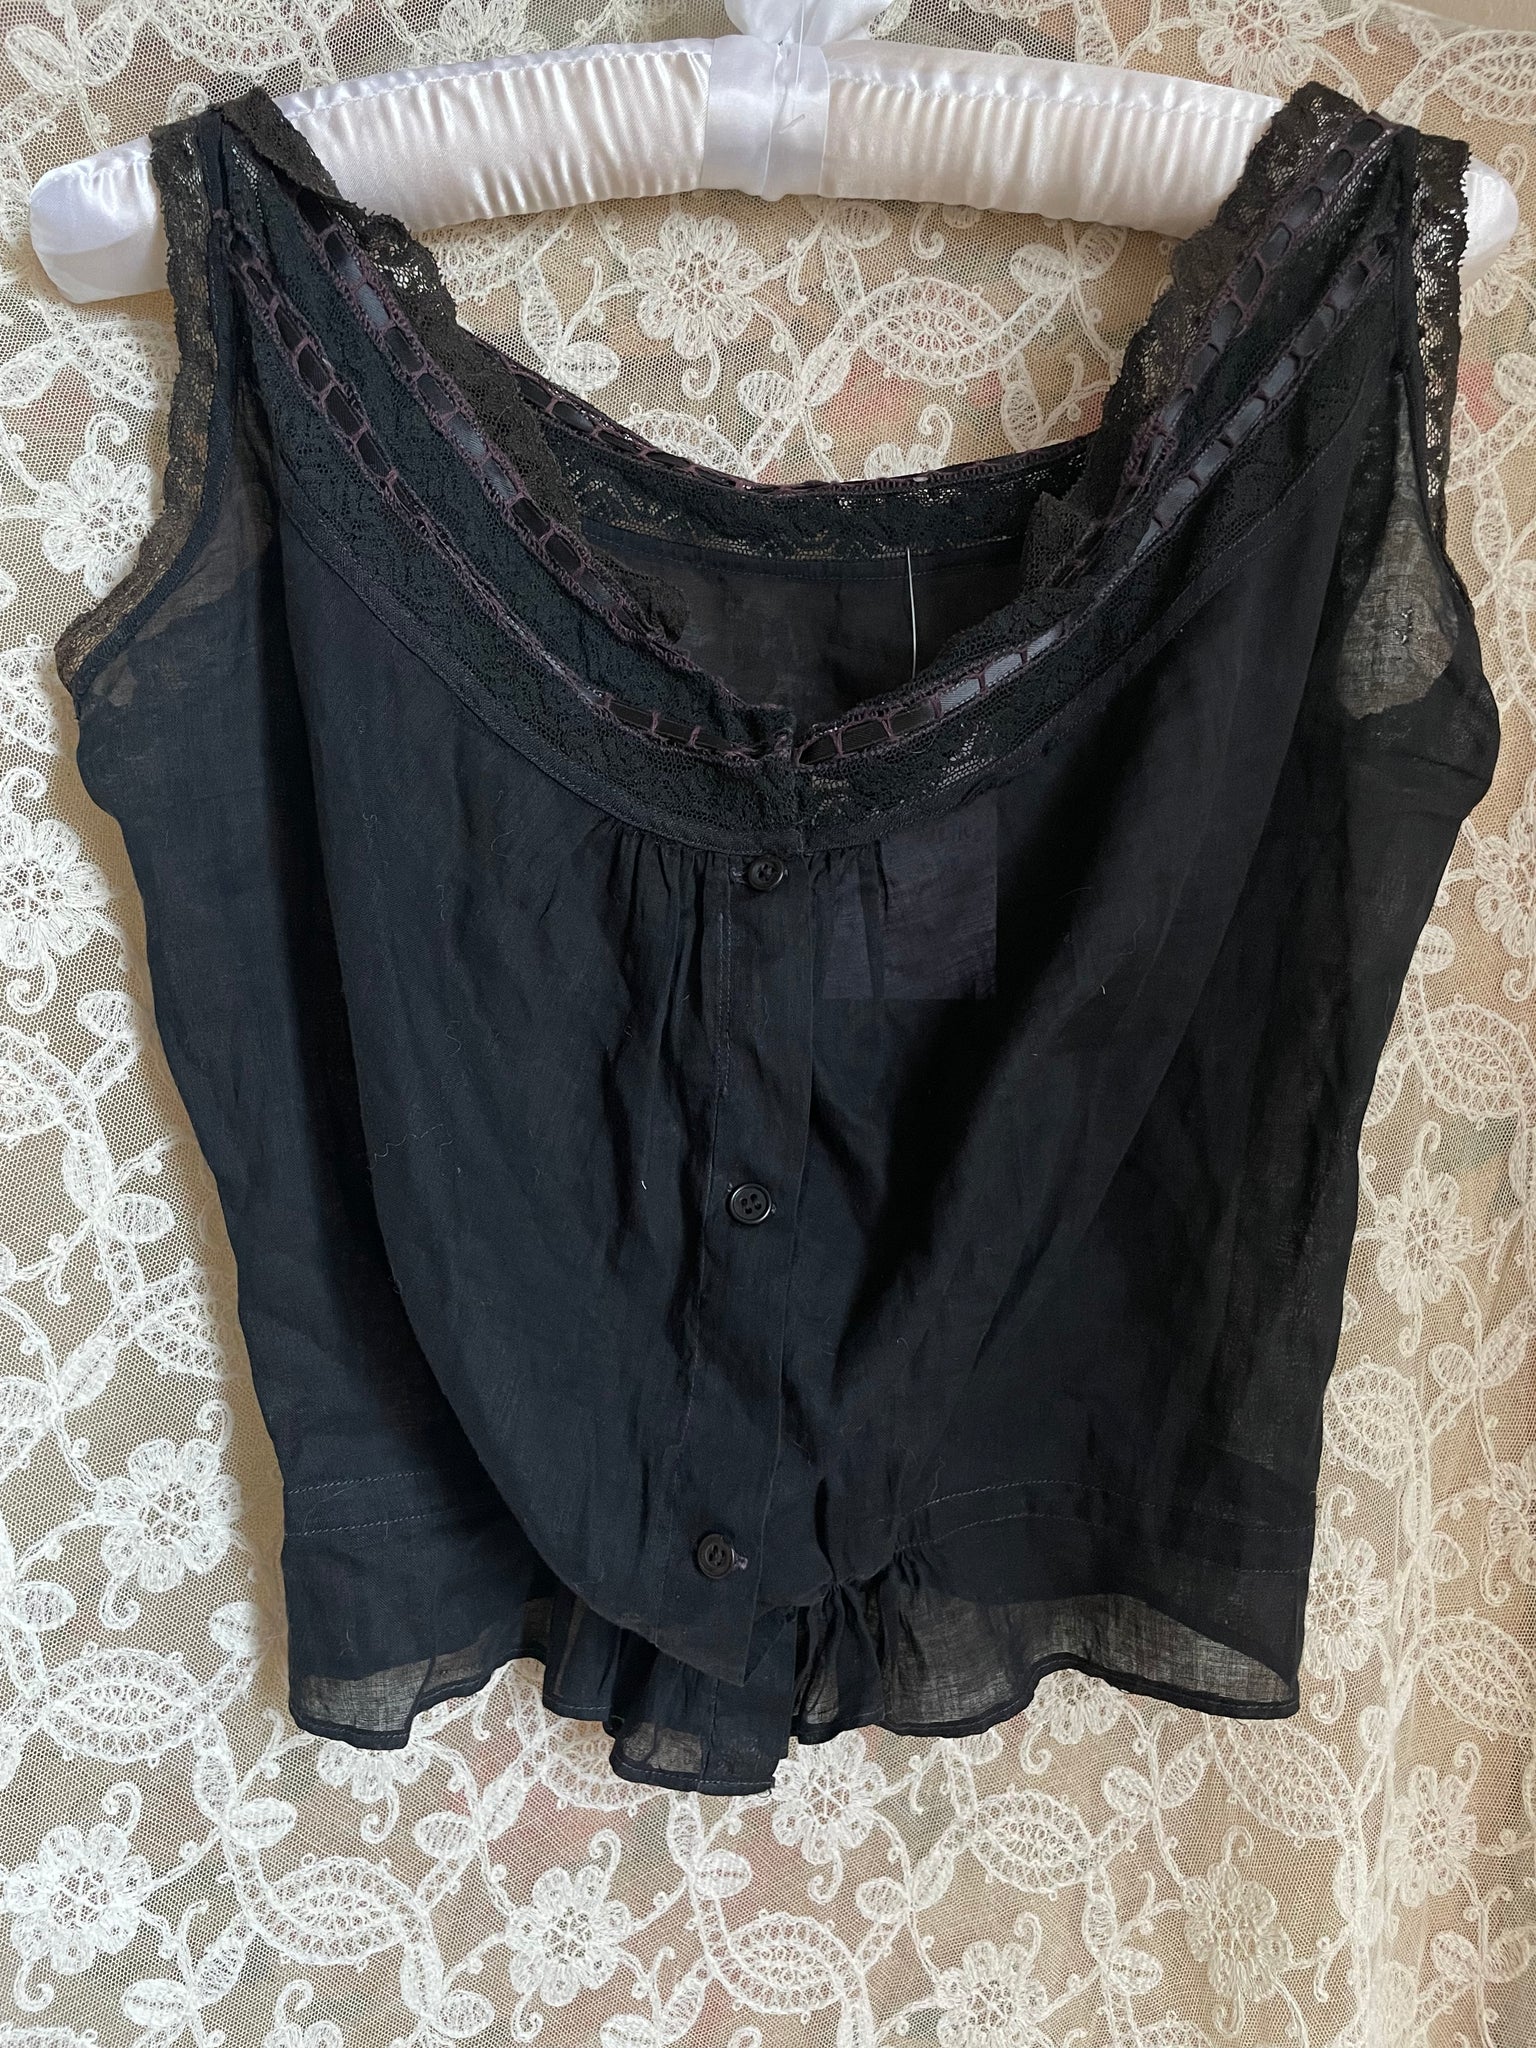 1900s Black Cotton Lace Overdyed Corset Cover Camisole